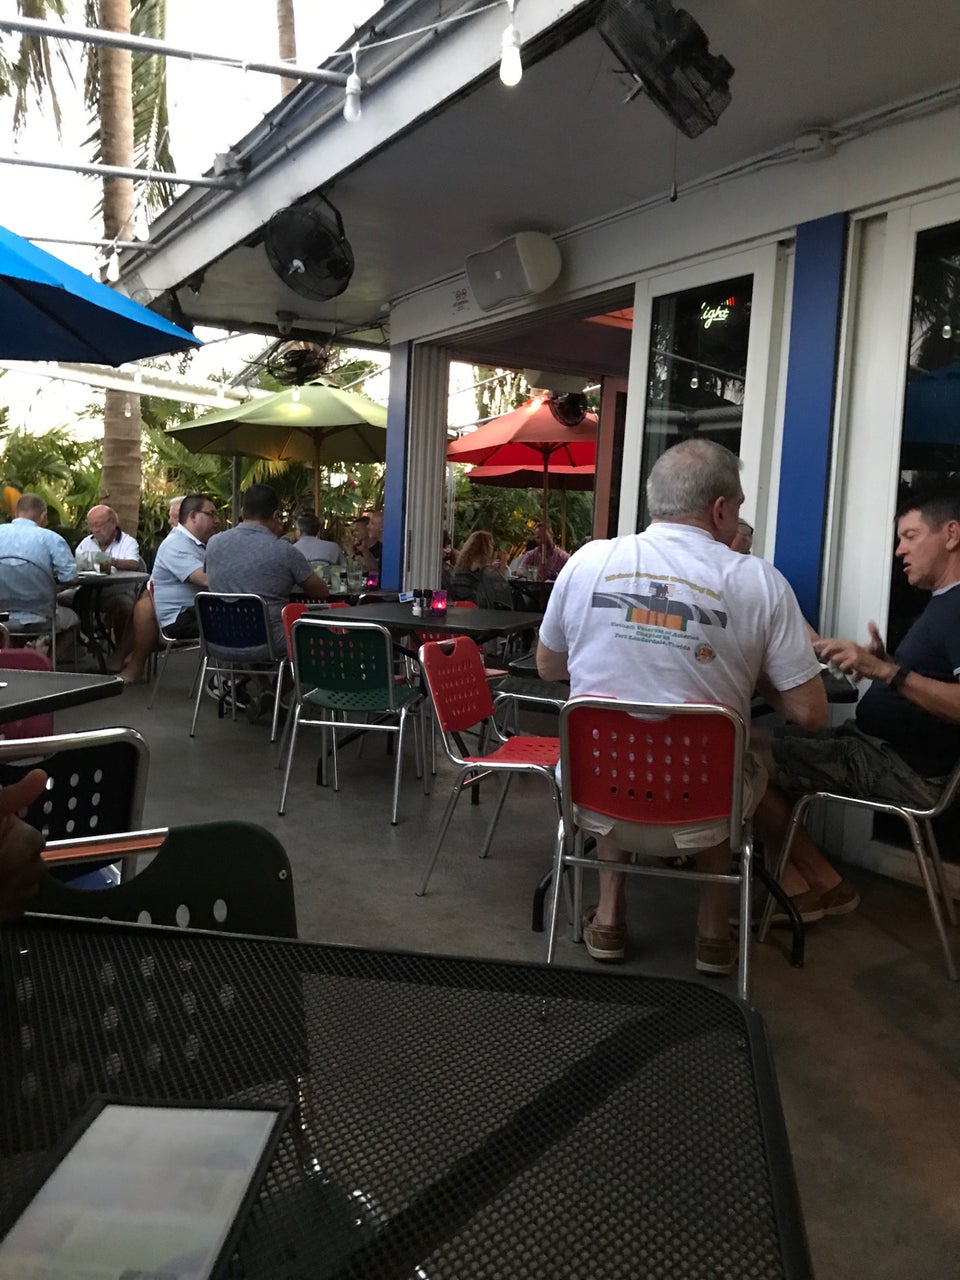 Rosie's Bar & Grill Photos - GayCities Fort Lauderdale